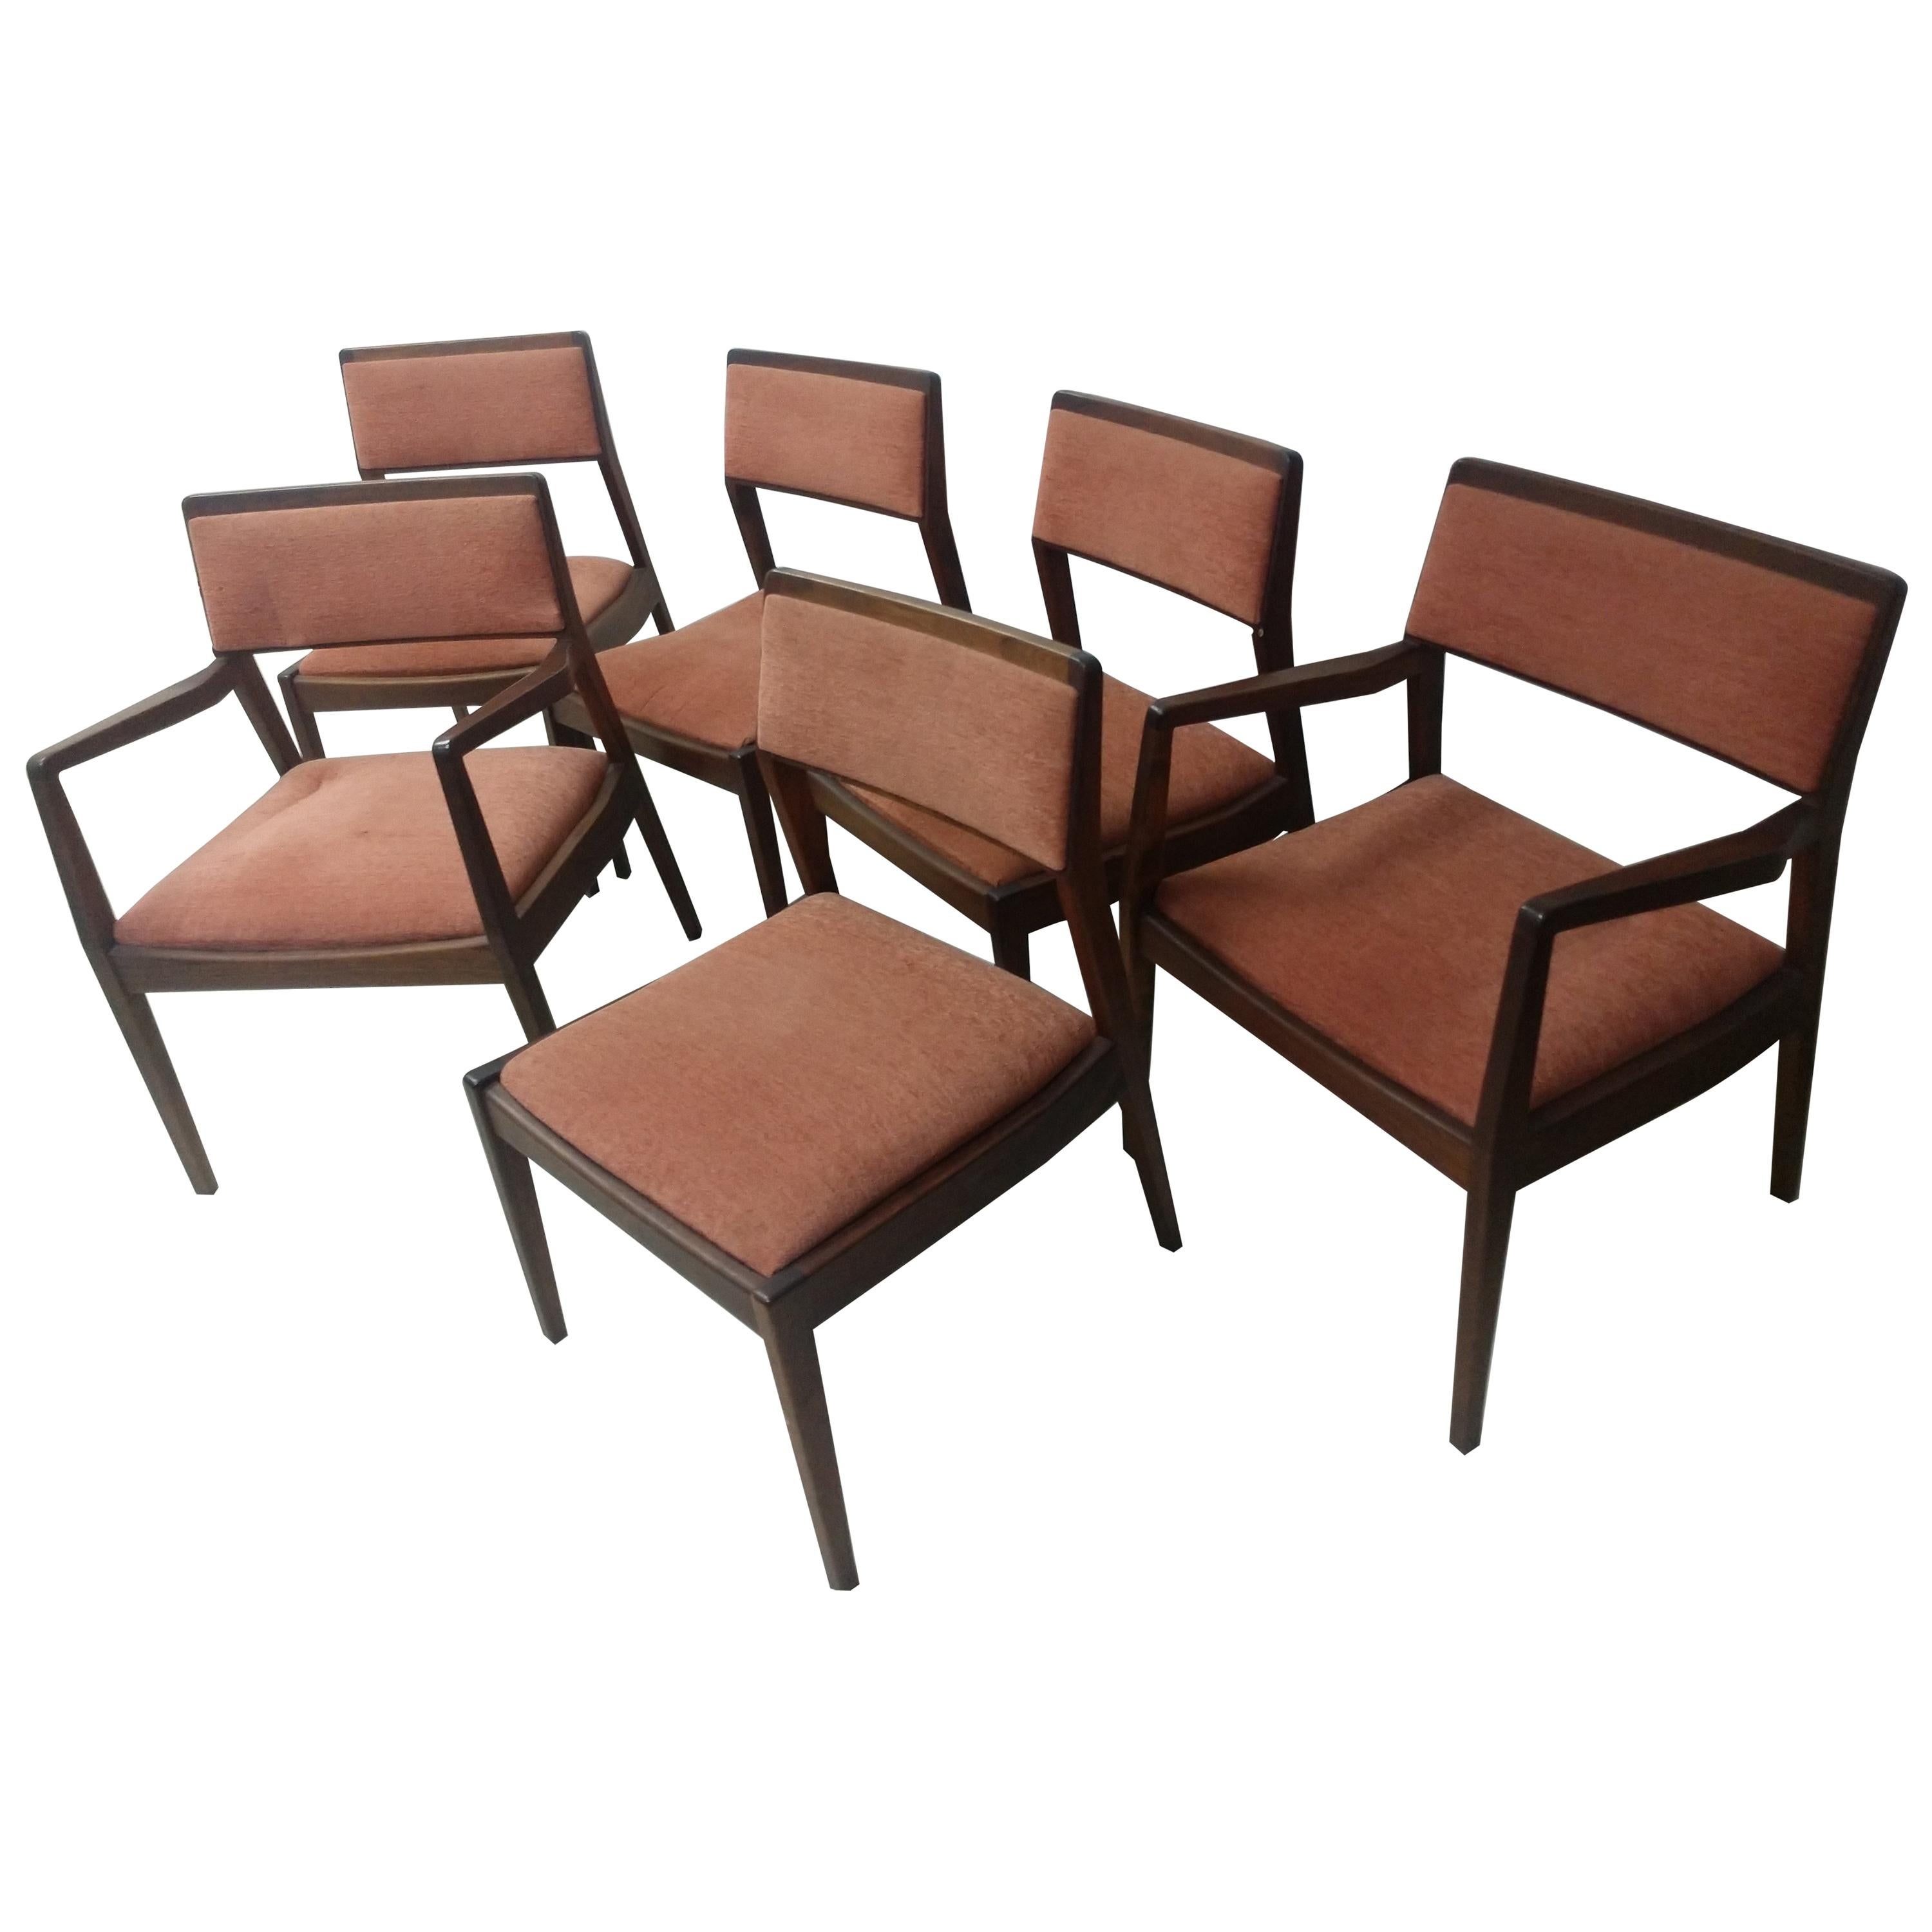 Set of Six Mid-Century Modern Dining Chairs by Jen's Risom